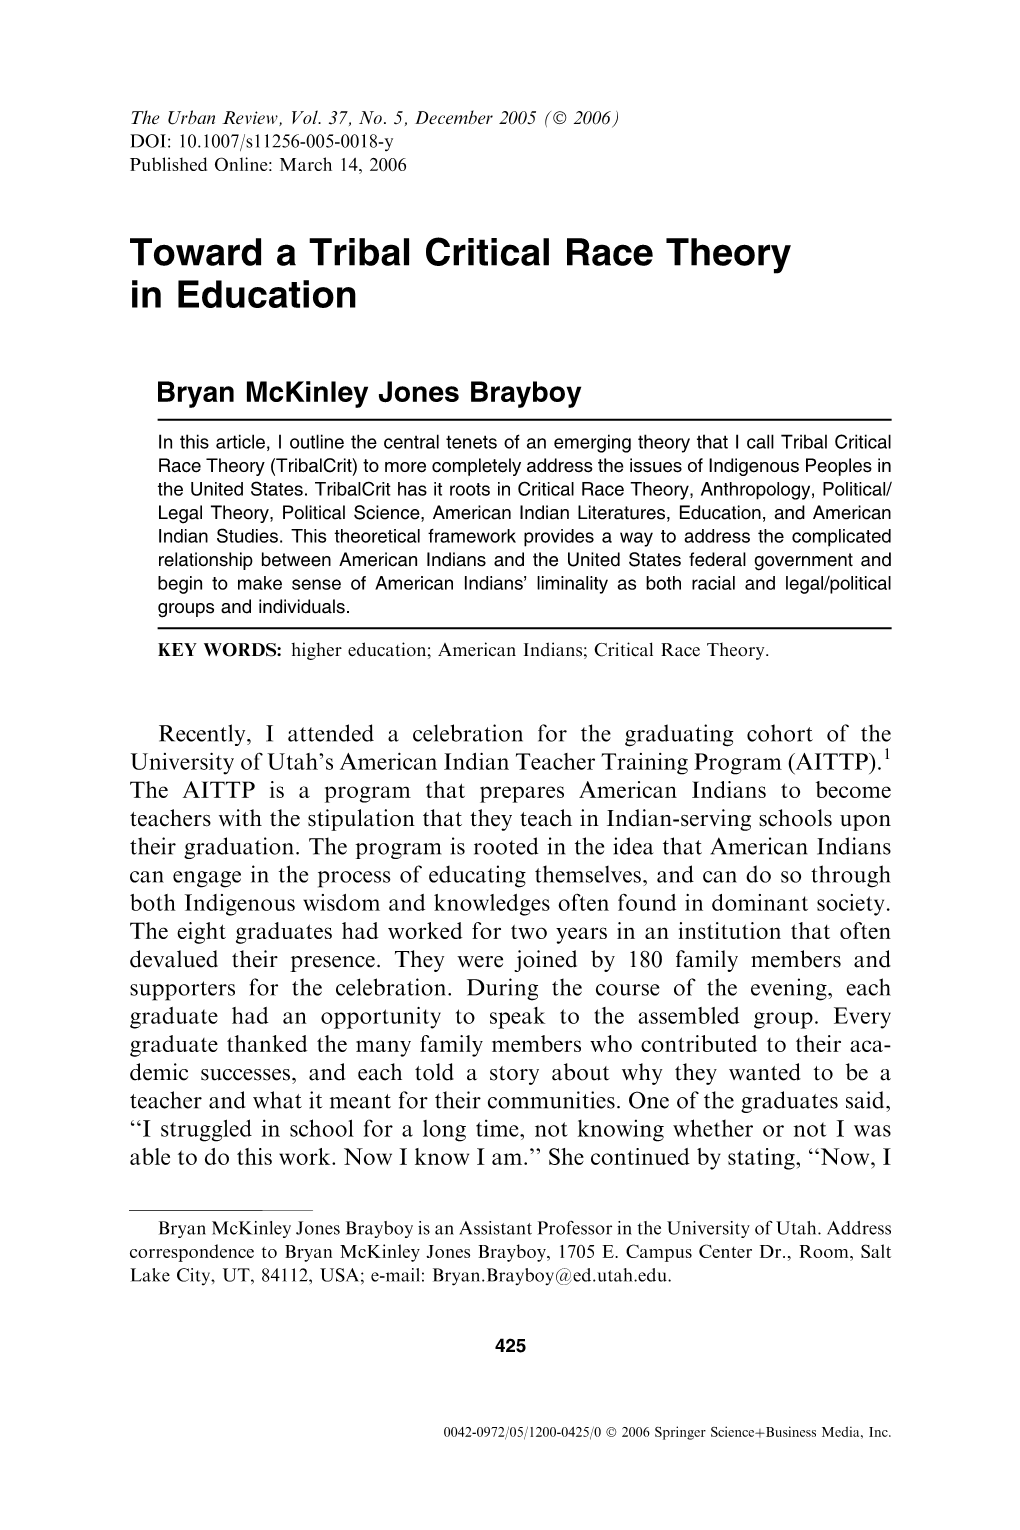 Toward a Tribal Critical Race Theory in Education